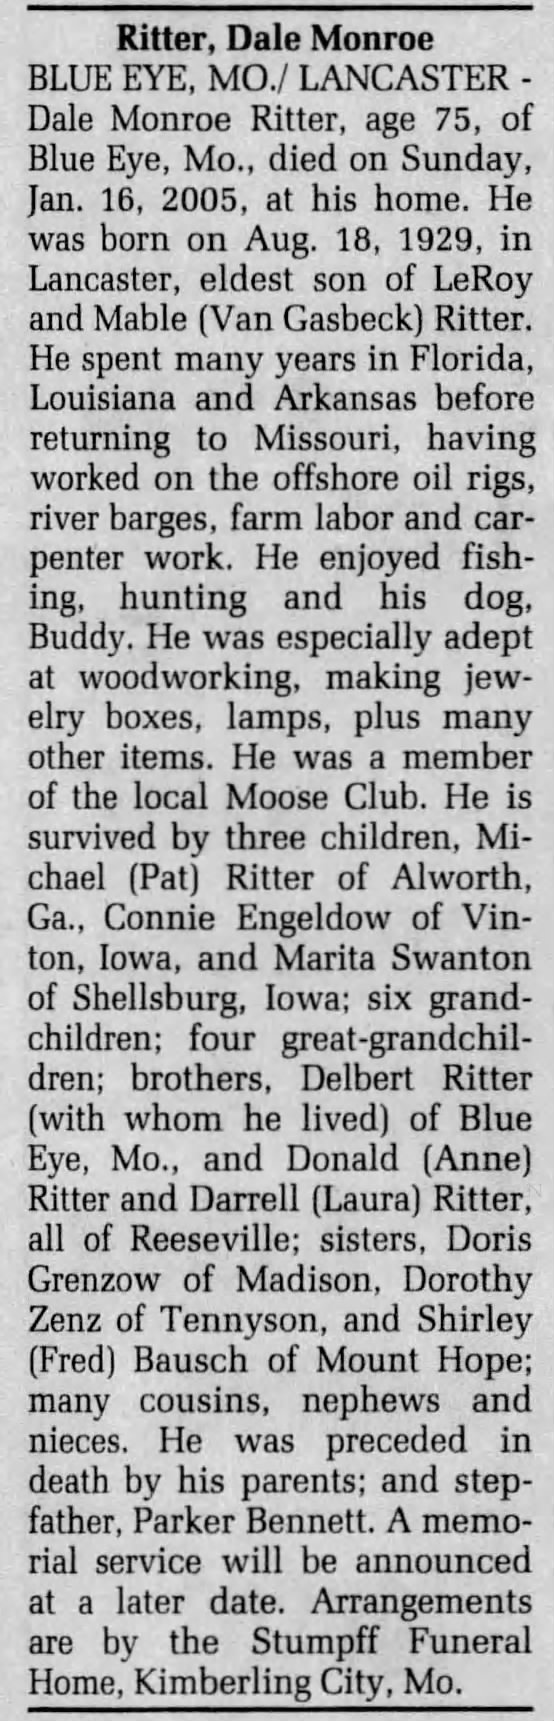 Obituary for Dale Monroe Ritter, 1929-2005 (Aged 75)